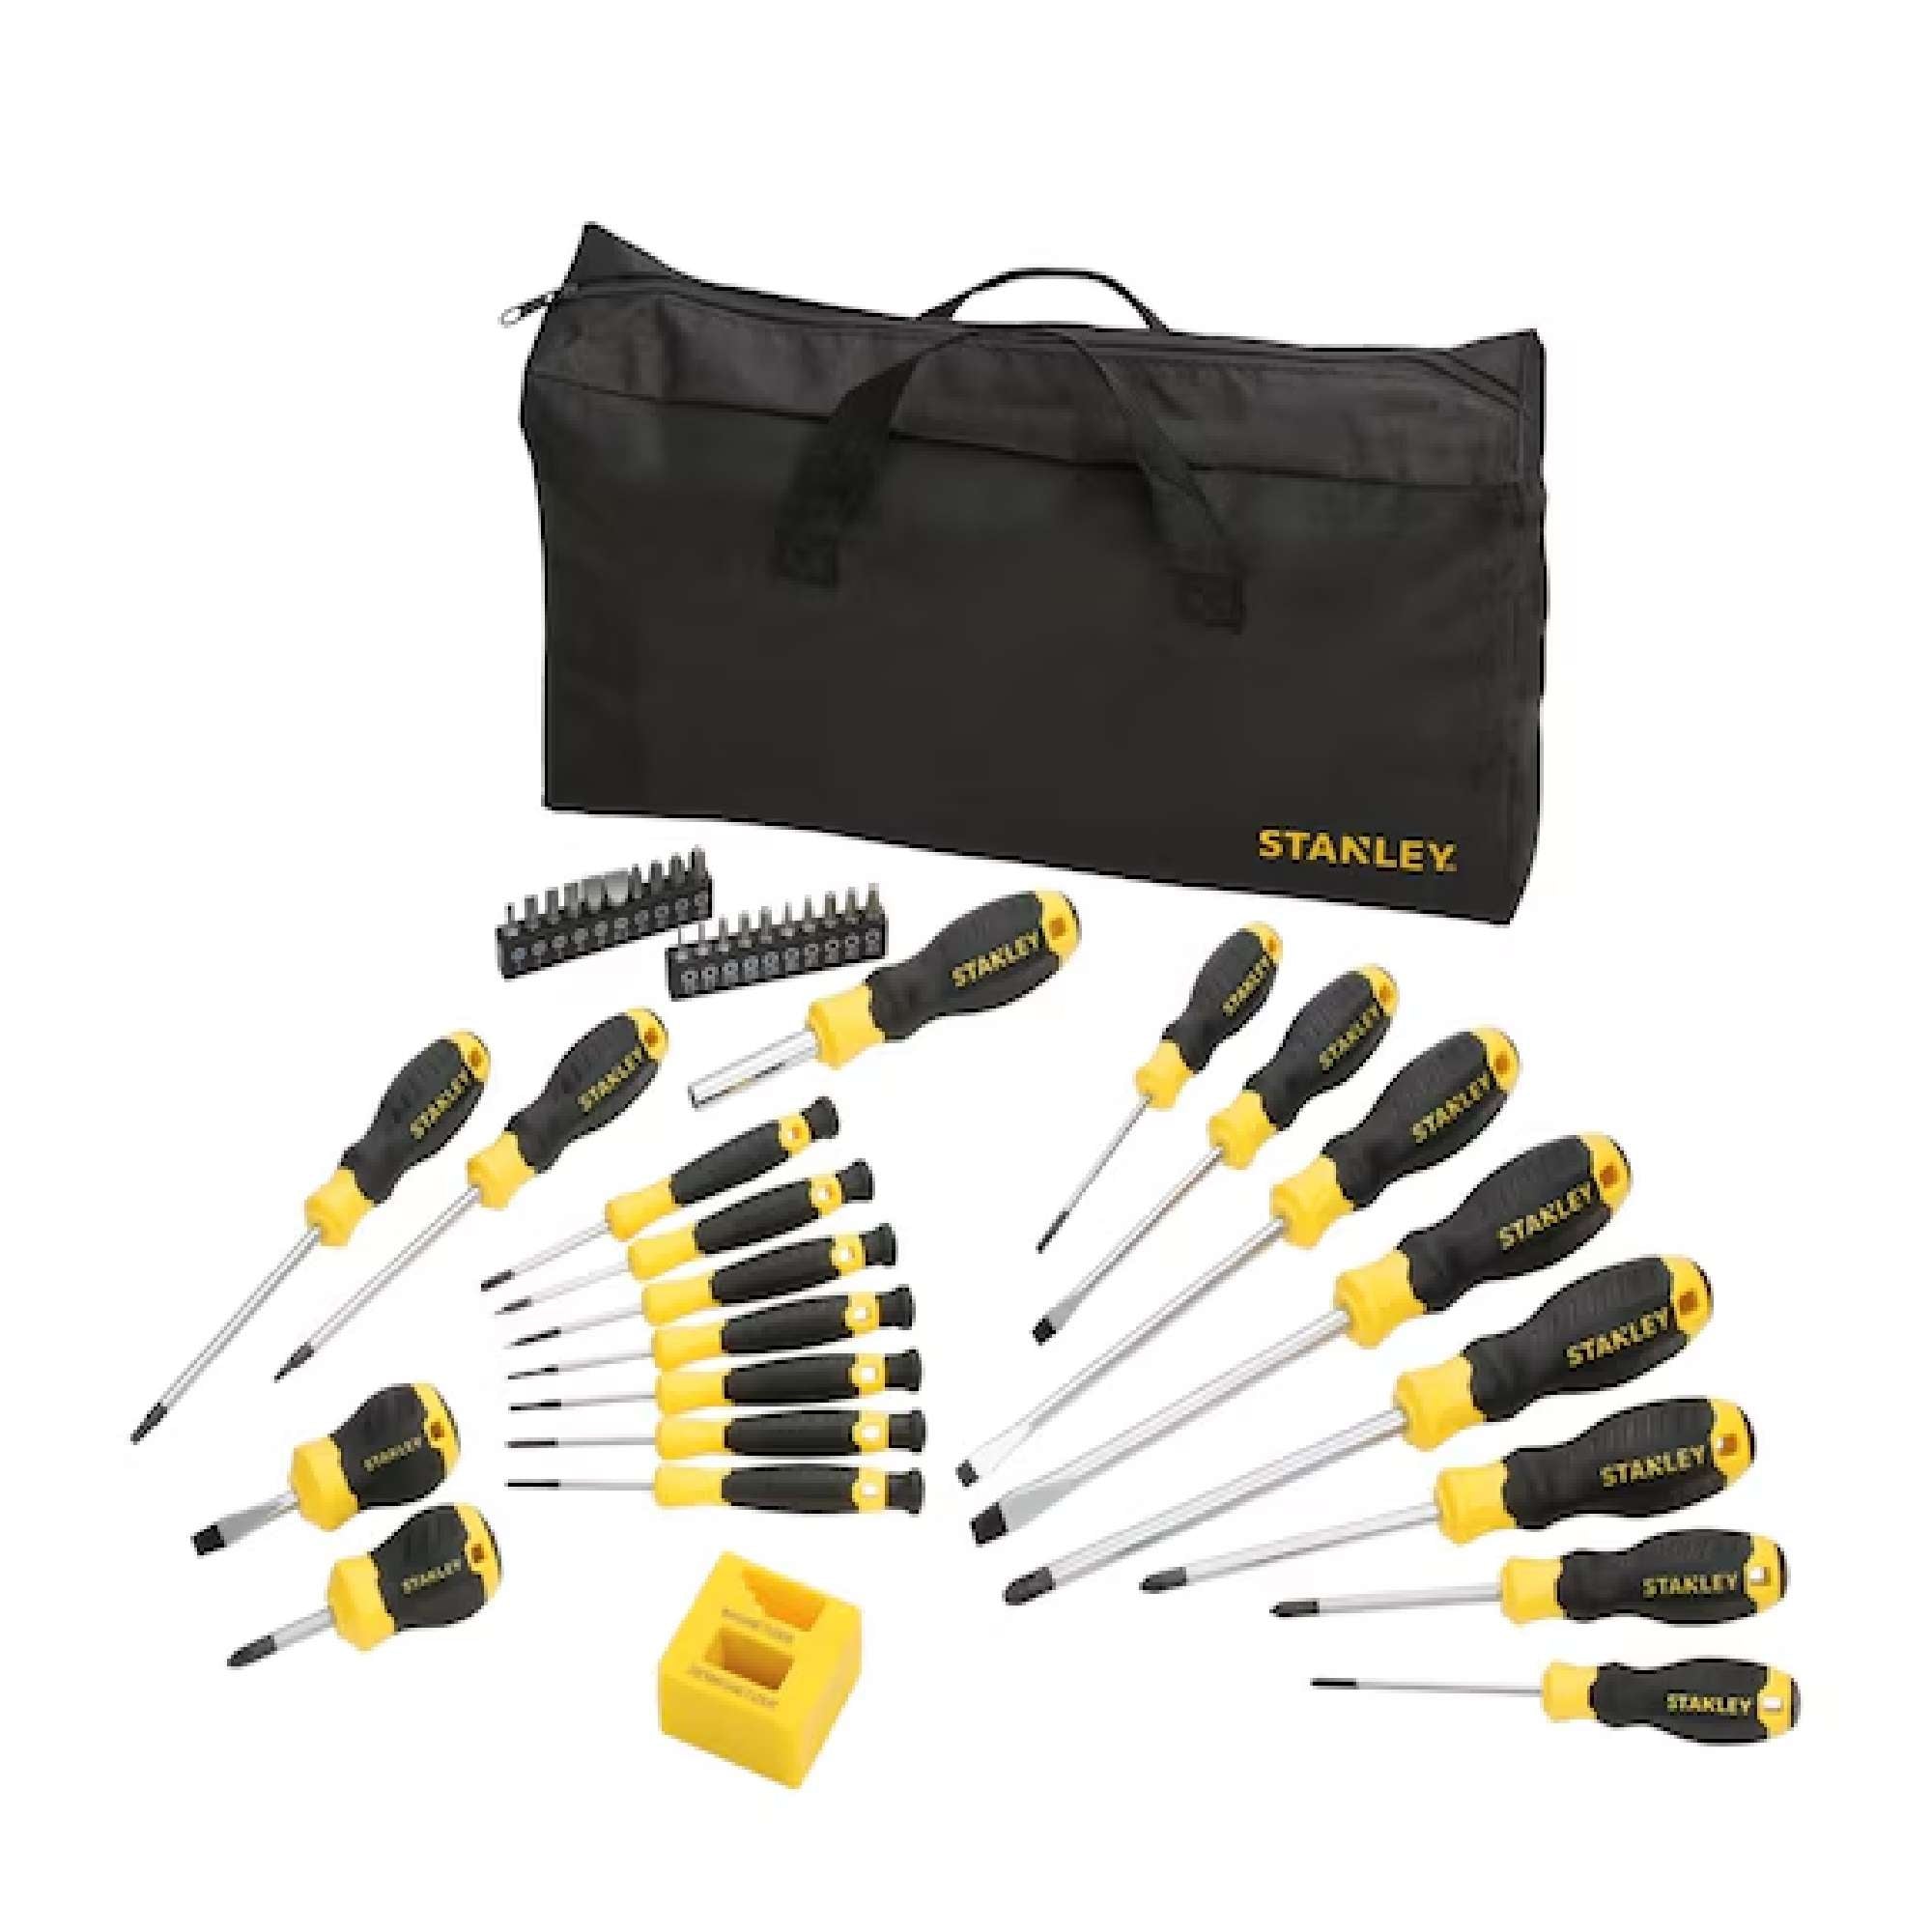 43 Piece Screwdriver Set with Bi-Component Handle - Stanley STHT0-62113